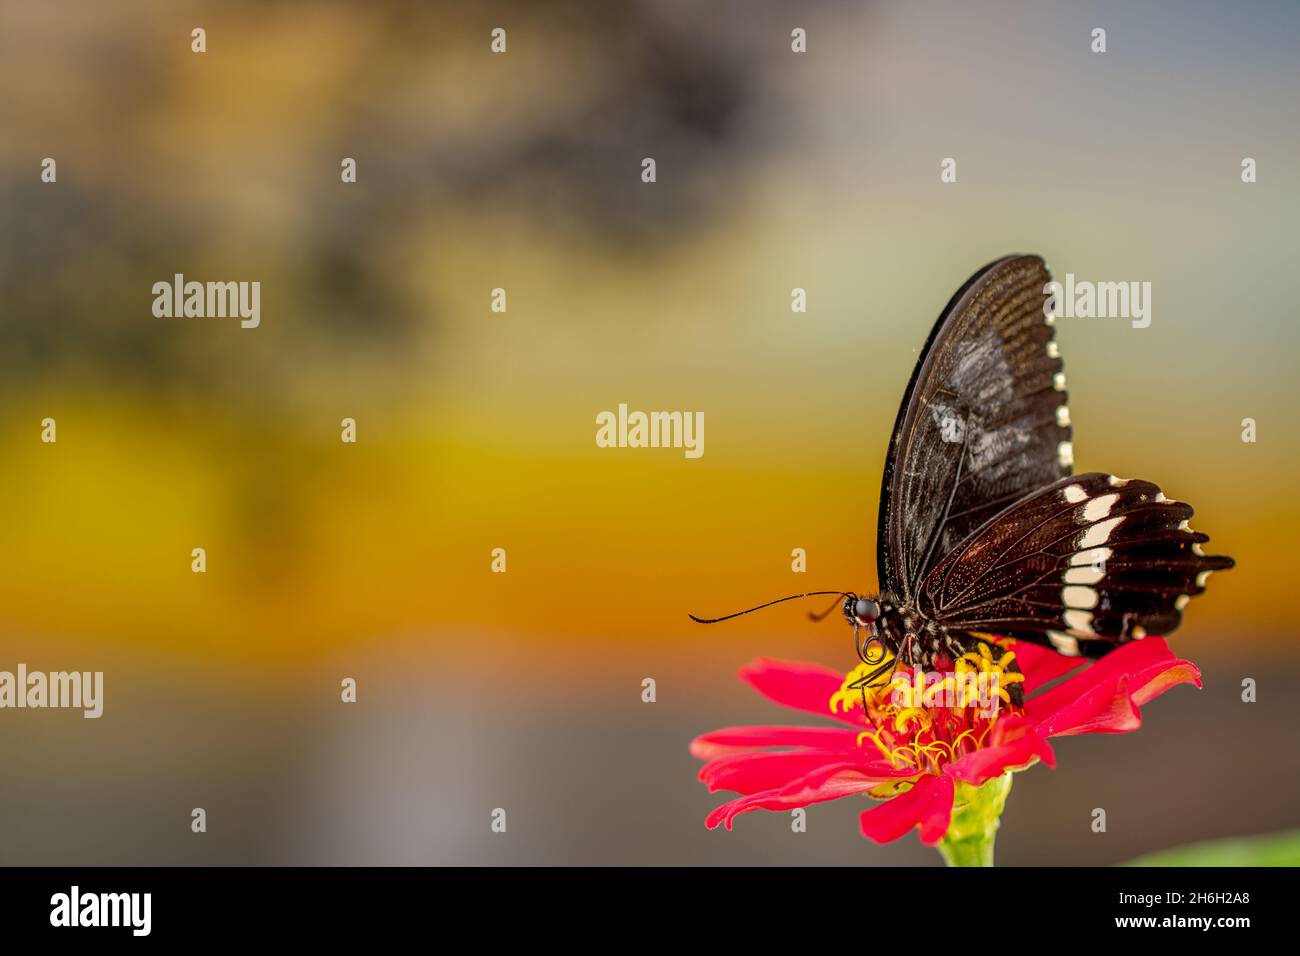 A brown butterfly perched on a red zinnia flower, has a background of autumn leaves and warm sunlight, copy space Stock Photo